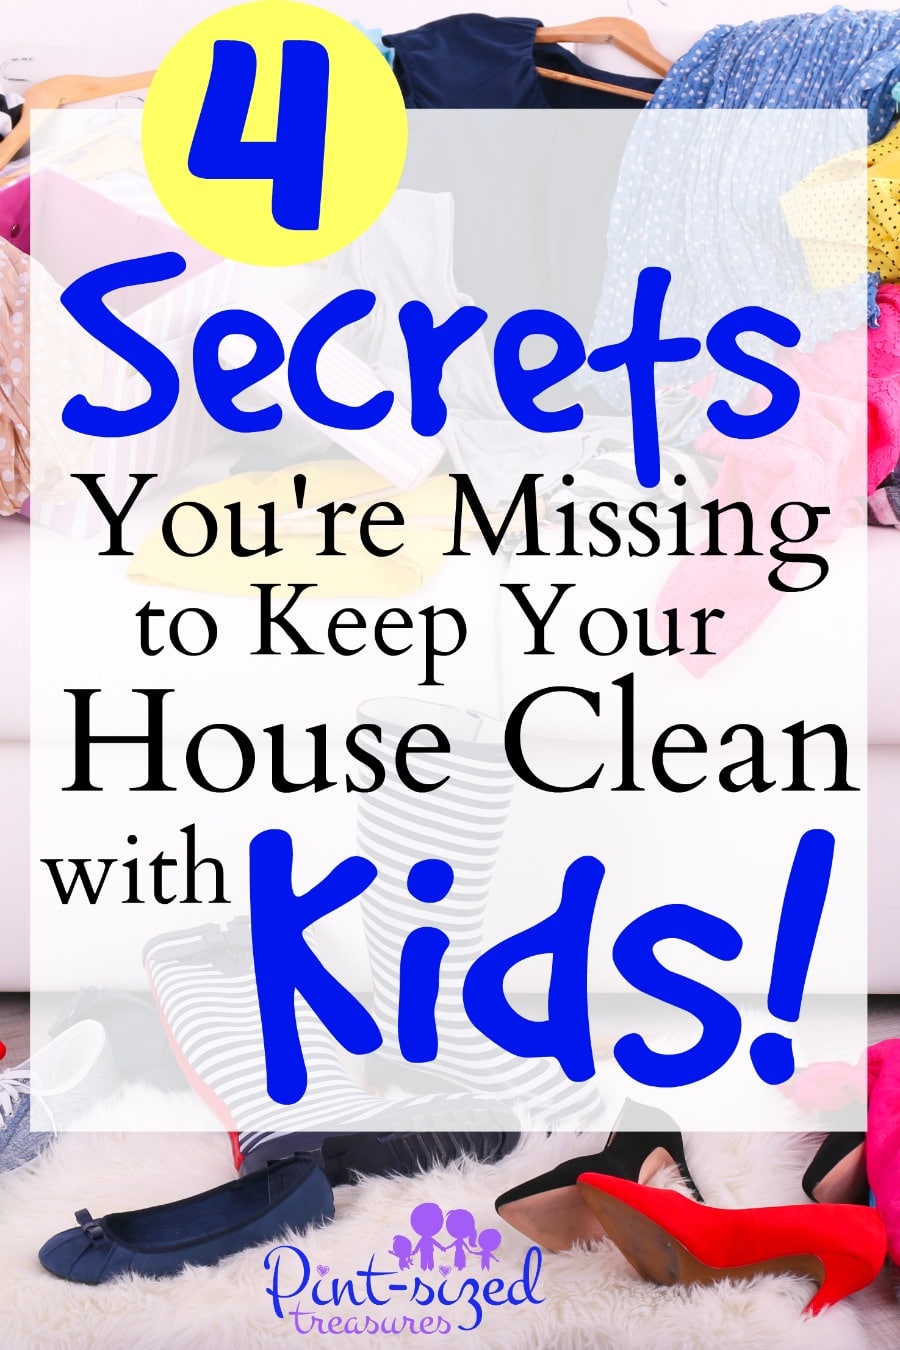 Clean house secrets that you're missing